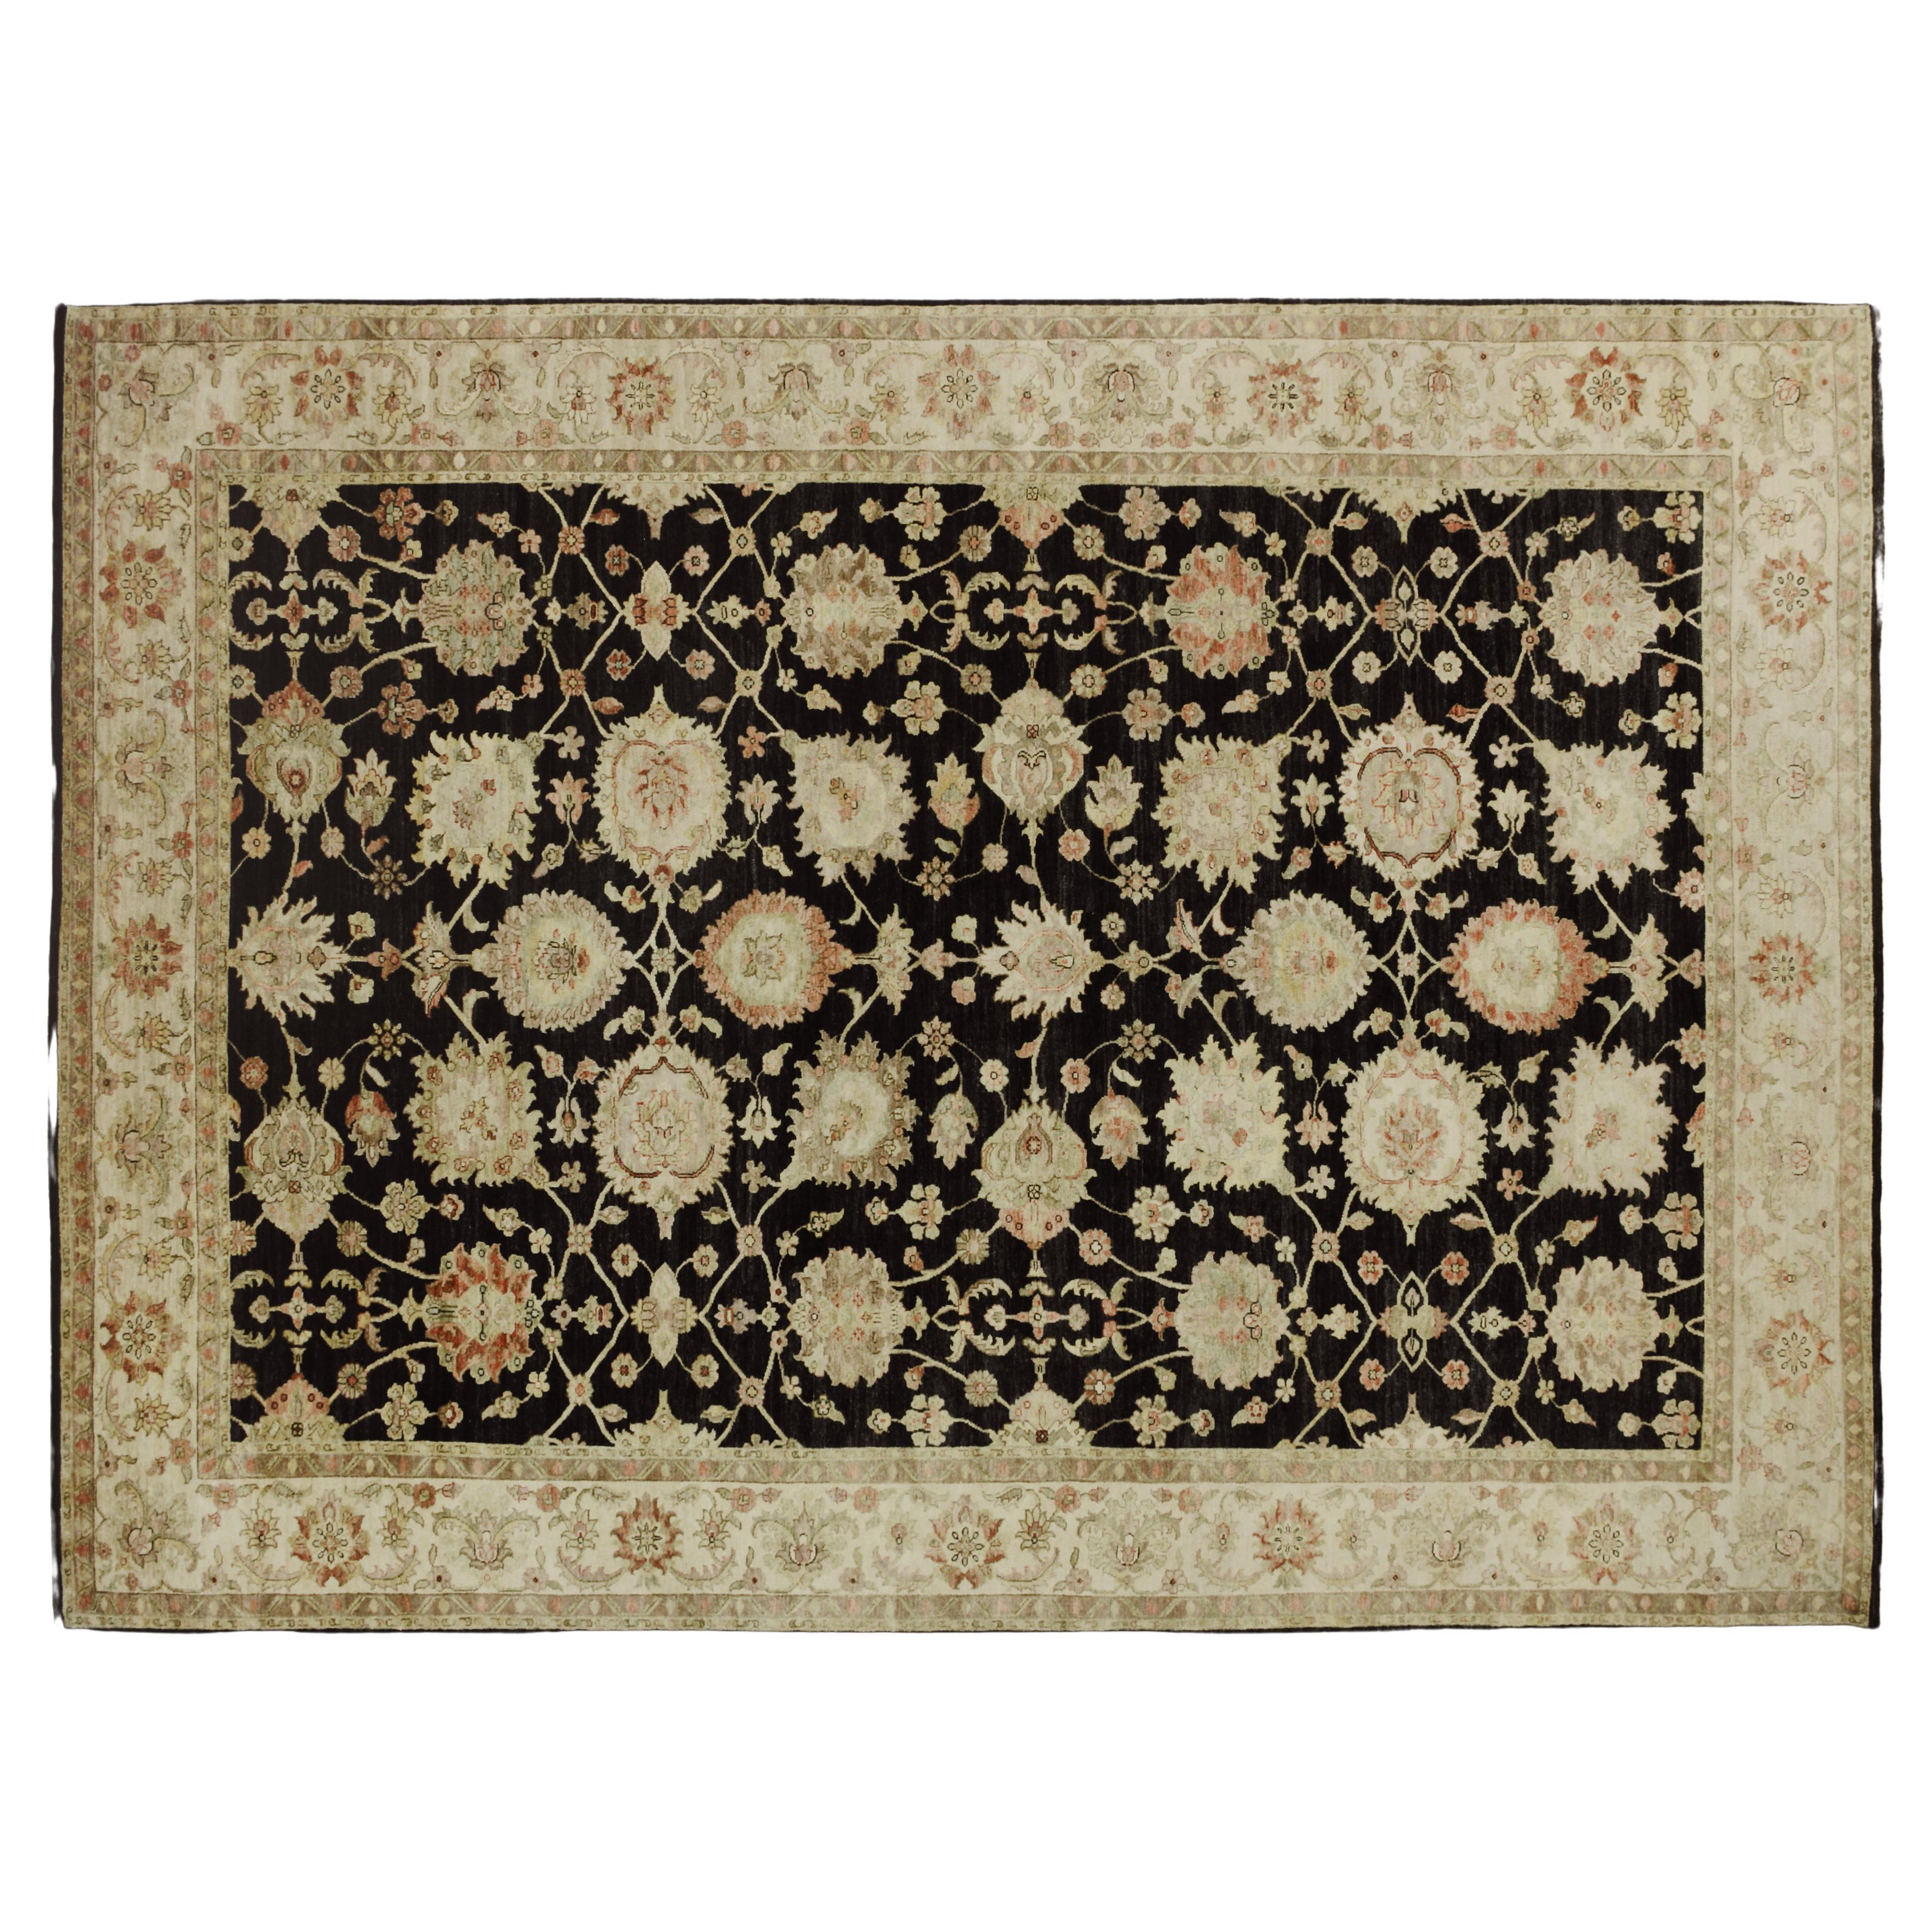 This Indian Oushak rug features a reds floral design  allowing you to switch up your decor. Add a touch of style to any room while also having the option to change things up to suit your mood. Beautiful and versatile, this rug is a must-have for any